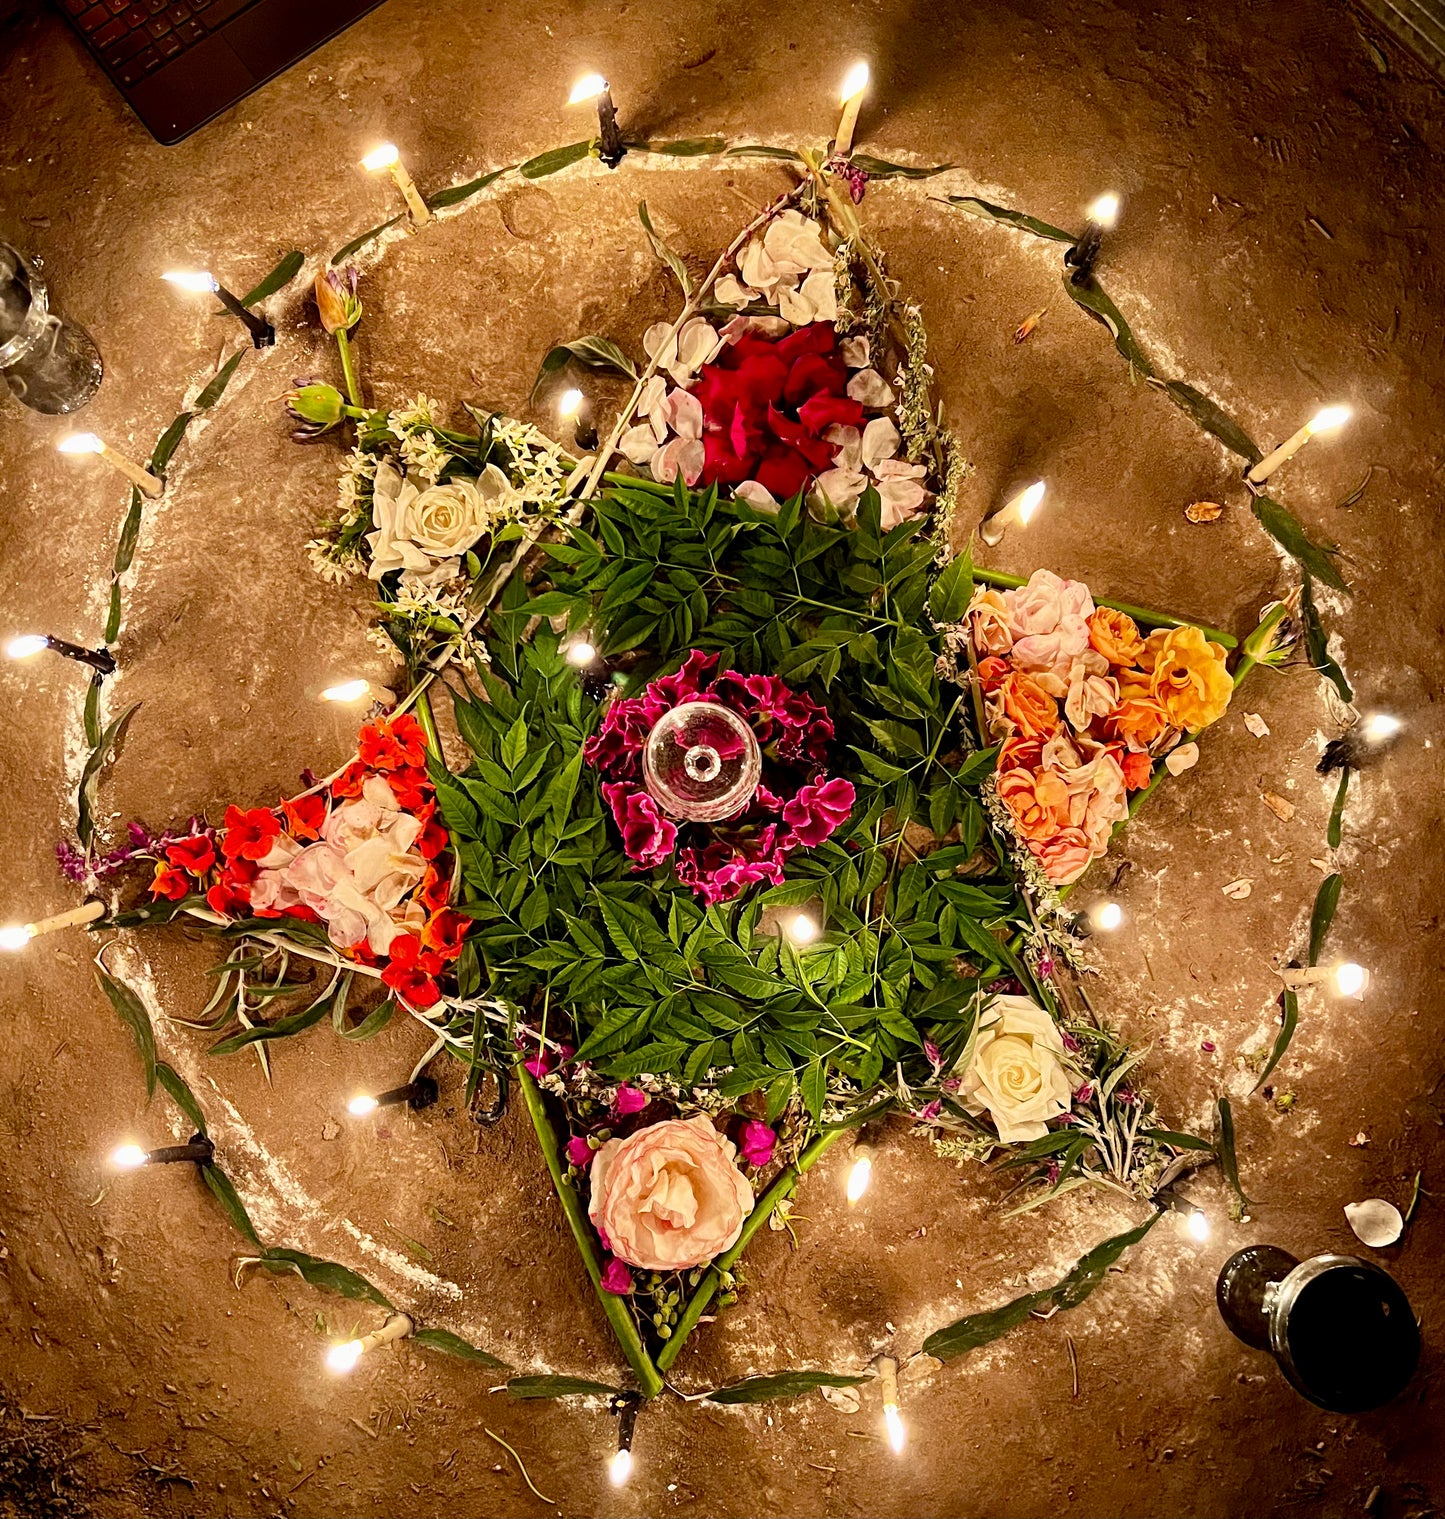 A six pointed star made of roses and plants. Candle work for the solstice using tallow candles.